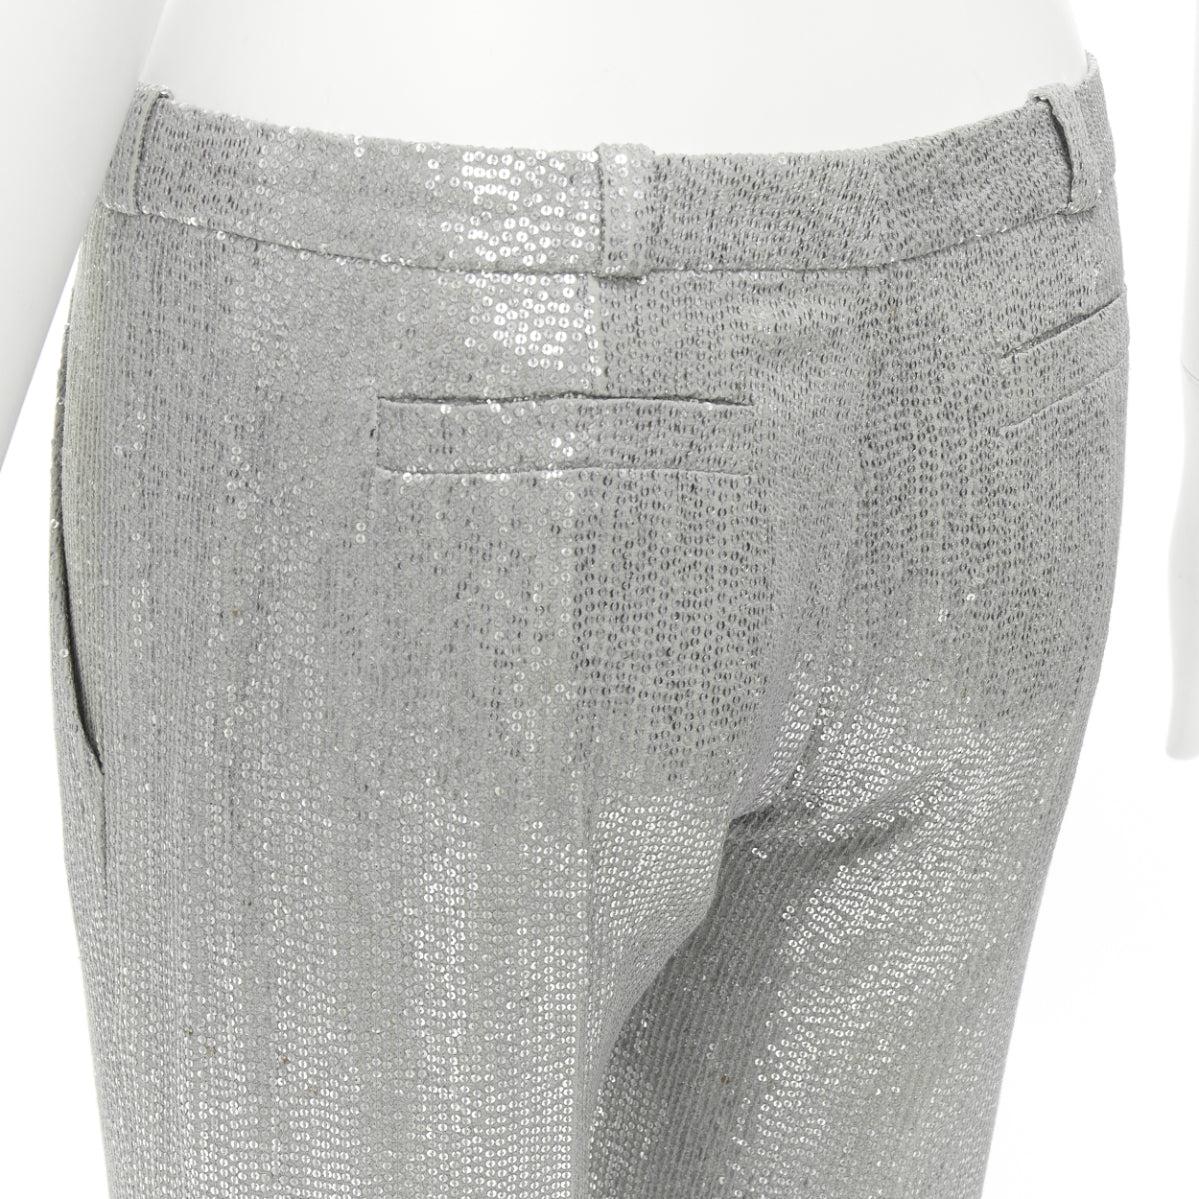 ALEXIS MABILLE 100% silk silver sequinned straight leg trouser pants FR36 S
Reference: NKLL/A00199
Brand: Alexis Mabille
Material: Silk
Color: Grey, Silver
Pattern: Sequins
Closure: Zip Fly
Lining: Cream Fabric
Made in: France

CONDITION:
Condition: